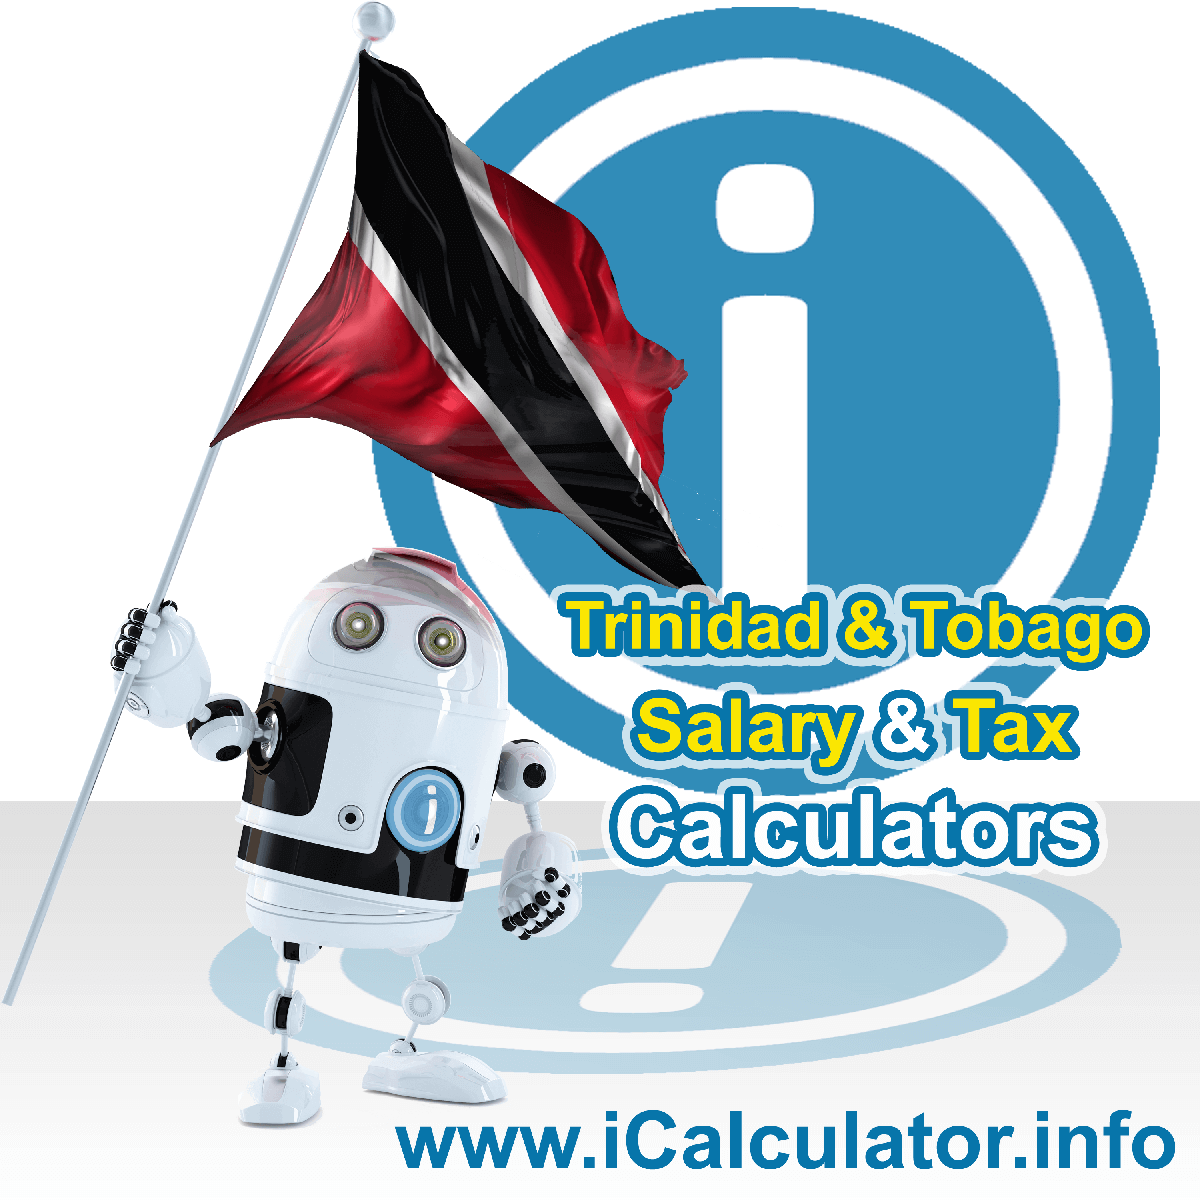 Trinidad And Tobago Salary Calculator. This image shows the Trinidad And Tobagoese flag and information relating to the tax formula for the Trinidad And Tobago Tax Calculator